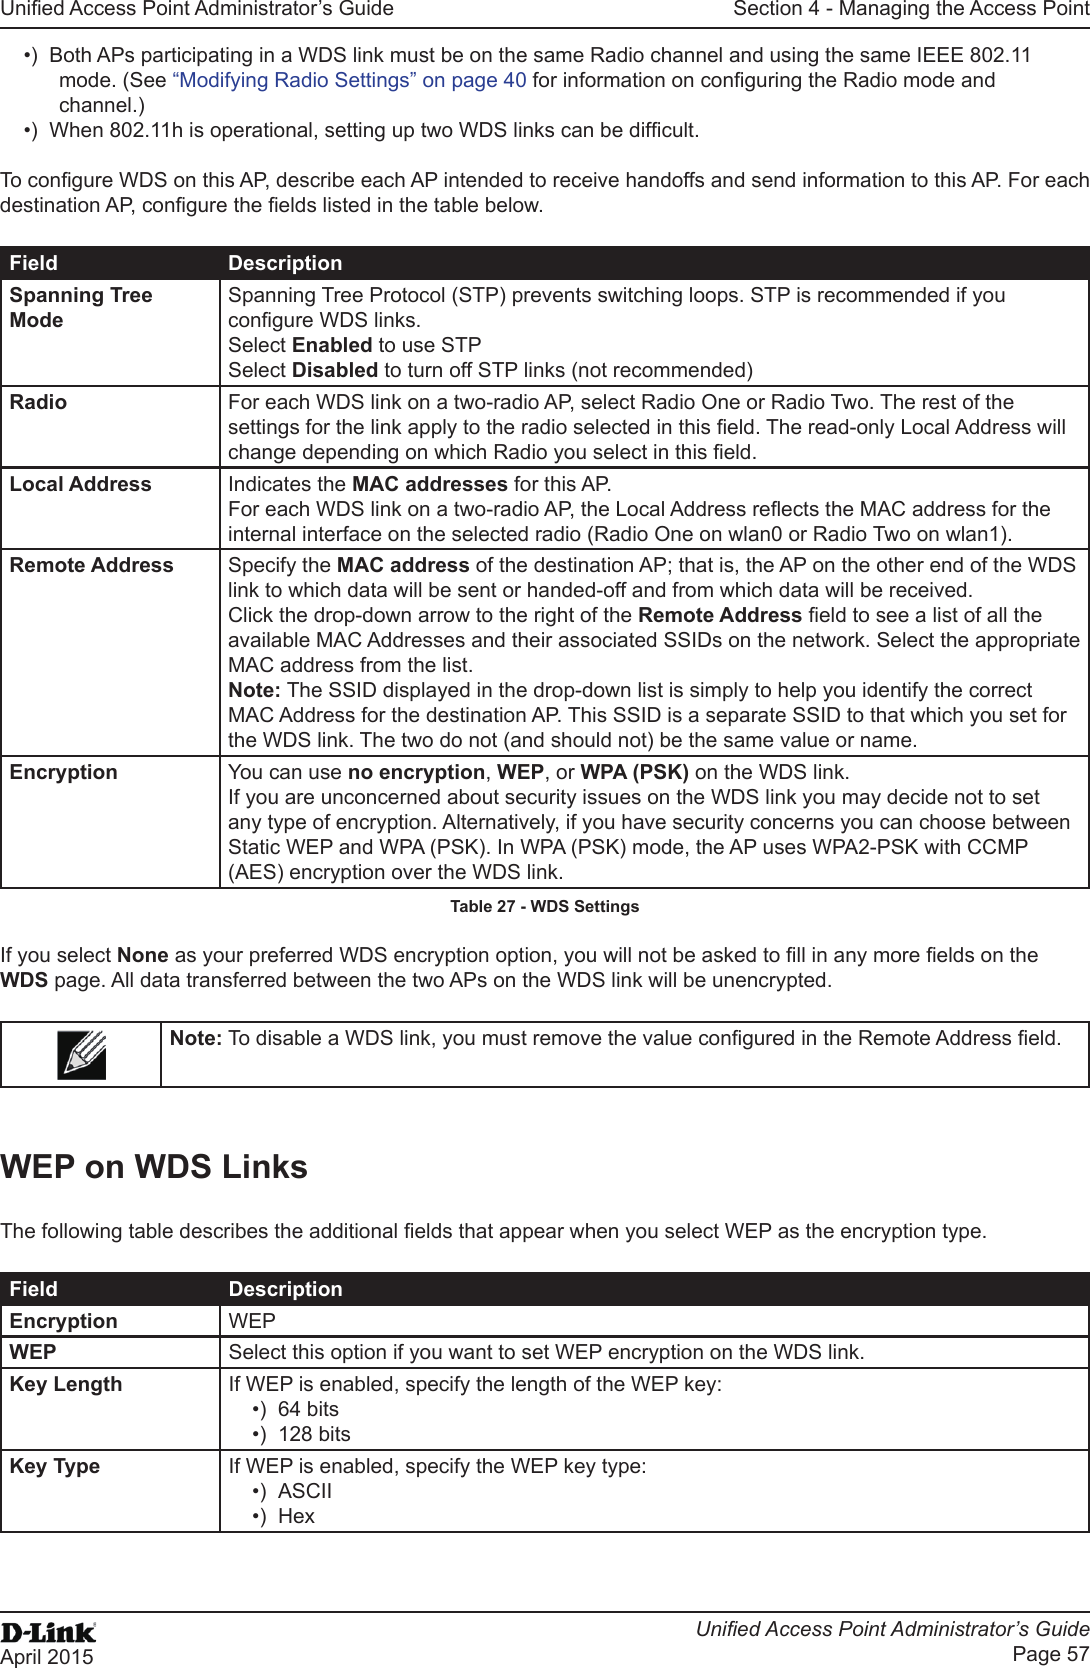 Unied Access Point Administrator’s GuideUnied Access Point Administrator’s GuidePage 57April 2015Section 4 - Managing the Access Point•)  Both APs participating in a WDS link must be on the same Radio channel and using the same IEEE 802.11 mode. (See “Modifying Radio Settings” on page 40 for information on conguring the Radio mode and channel.)•)  When 802.11h is operational, setting up two WDS links can be difcult.To congure WDS on this AP, describe each AP intended to receive handoffs and send information to this AP. For each destination AP, congure the elds listed in the table below.Field DescriptionSpanning Tree ModeSpanning Tree Protocol (STP) prevents switching loops. STP is recommended if you congure WDS links. Select Enabled to use STPSelect Disabled to turn off STP links (not recommended)Radio For each WDS link on a two-radio AP, select Radio One or Radio Two. The rest of the settings for the link apply to the radio selected in this eld. The read-only Local Address will change depending on which Radio you select in this eld.Local Address Indicates the MAC addresses for this AP.For each WDS link on a two-radio AP, the Local Address reects the MAC address for the internal interface on the selected radio (Radio One on wlan0 or Radio Two on wlan1).Remote Address Specify the MAC address of the destination AP; that is, the AP on the other end of the WDS link to which data will be sent or handed-off and from which data will be received.Click the drop-down arrow to the right of the Remote Address eld to see a list of all the available MAC Addresses and their associated SSIDs on the network. Select the appropriate MAC address from the list.Note: The SSID displayed in the drop-down list is simply to help you identify the correct MAC Address for the destination AP. This SSID is a separate SSID to that which you set for the WDS link. The two do not (and should not) be the same value or name.Encryption You can use no encryption, WEP, or WPA (PSK) on the WDS link. If you are unconcerned about security issues on the WDS link you may decide not to set any type of encryption. Alternatively, if you have security concerns you can choose between Static WEP and WPA (PSK). In WPA (PSK) mode, the AP uses WPA2-PSK with CCMP (AES) encryption over the WDS link.Table 27 - WDS SettingsIf you select None as your preferred WDS encryption option, you will not be asked to ll in any more elds on the WDS page. All data transferred between the two APs on the WDS link will be unencrypted.Note: To disable a WDS link, you must remove the value congured in the Remote Address eld.WEP on WDS LinksThe following table describes the additional elds that appear when you select WEP as the encryption type.Field DescriptionEncryption WEPWEP Select this option if you want to set WEP encryption on the WDS link.Key Length If WEP is enabled, specify the length of the WEP key:•)  64 bits•)  128 bitsKey Type If WEP is enabled, specify the WEP key type:•)  ASCII•)  Hex